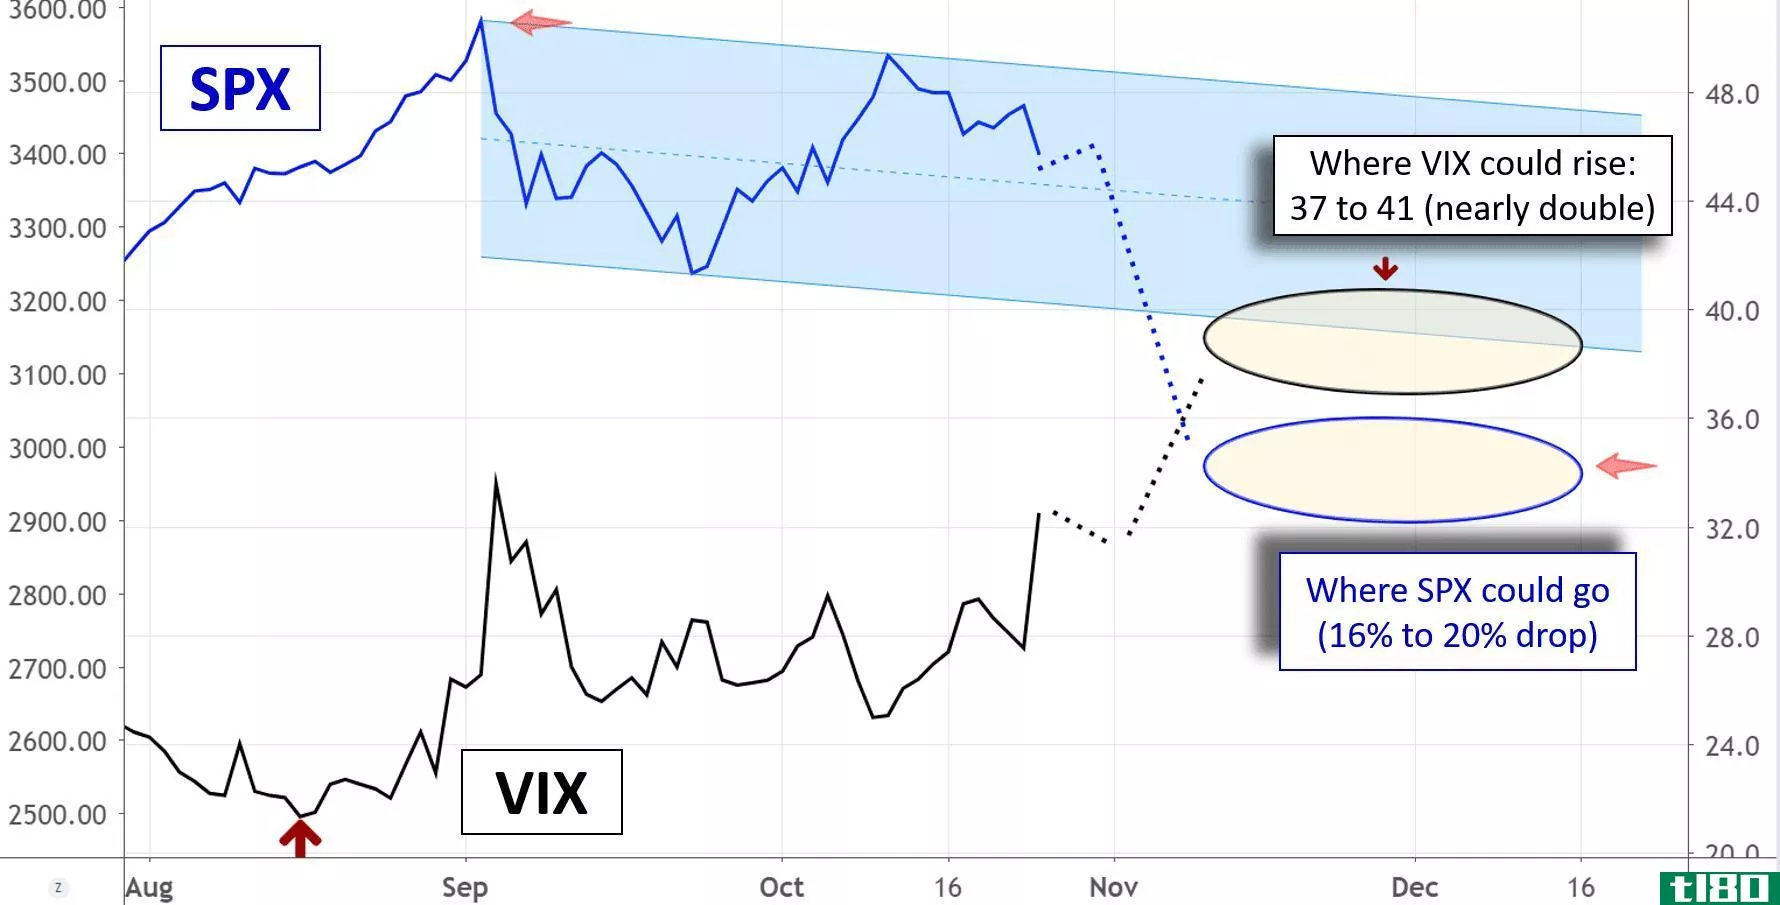 SPX compared to VIX - 2020